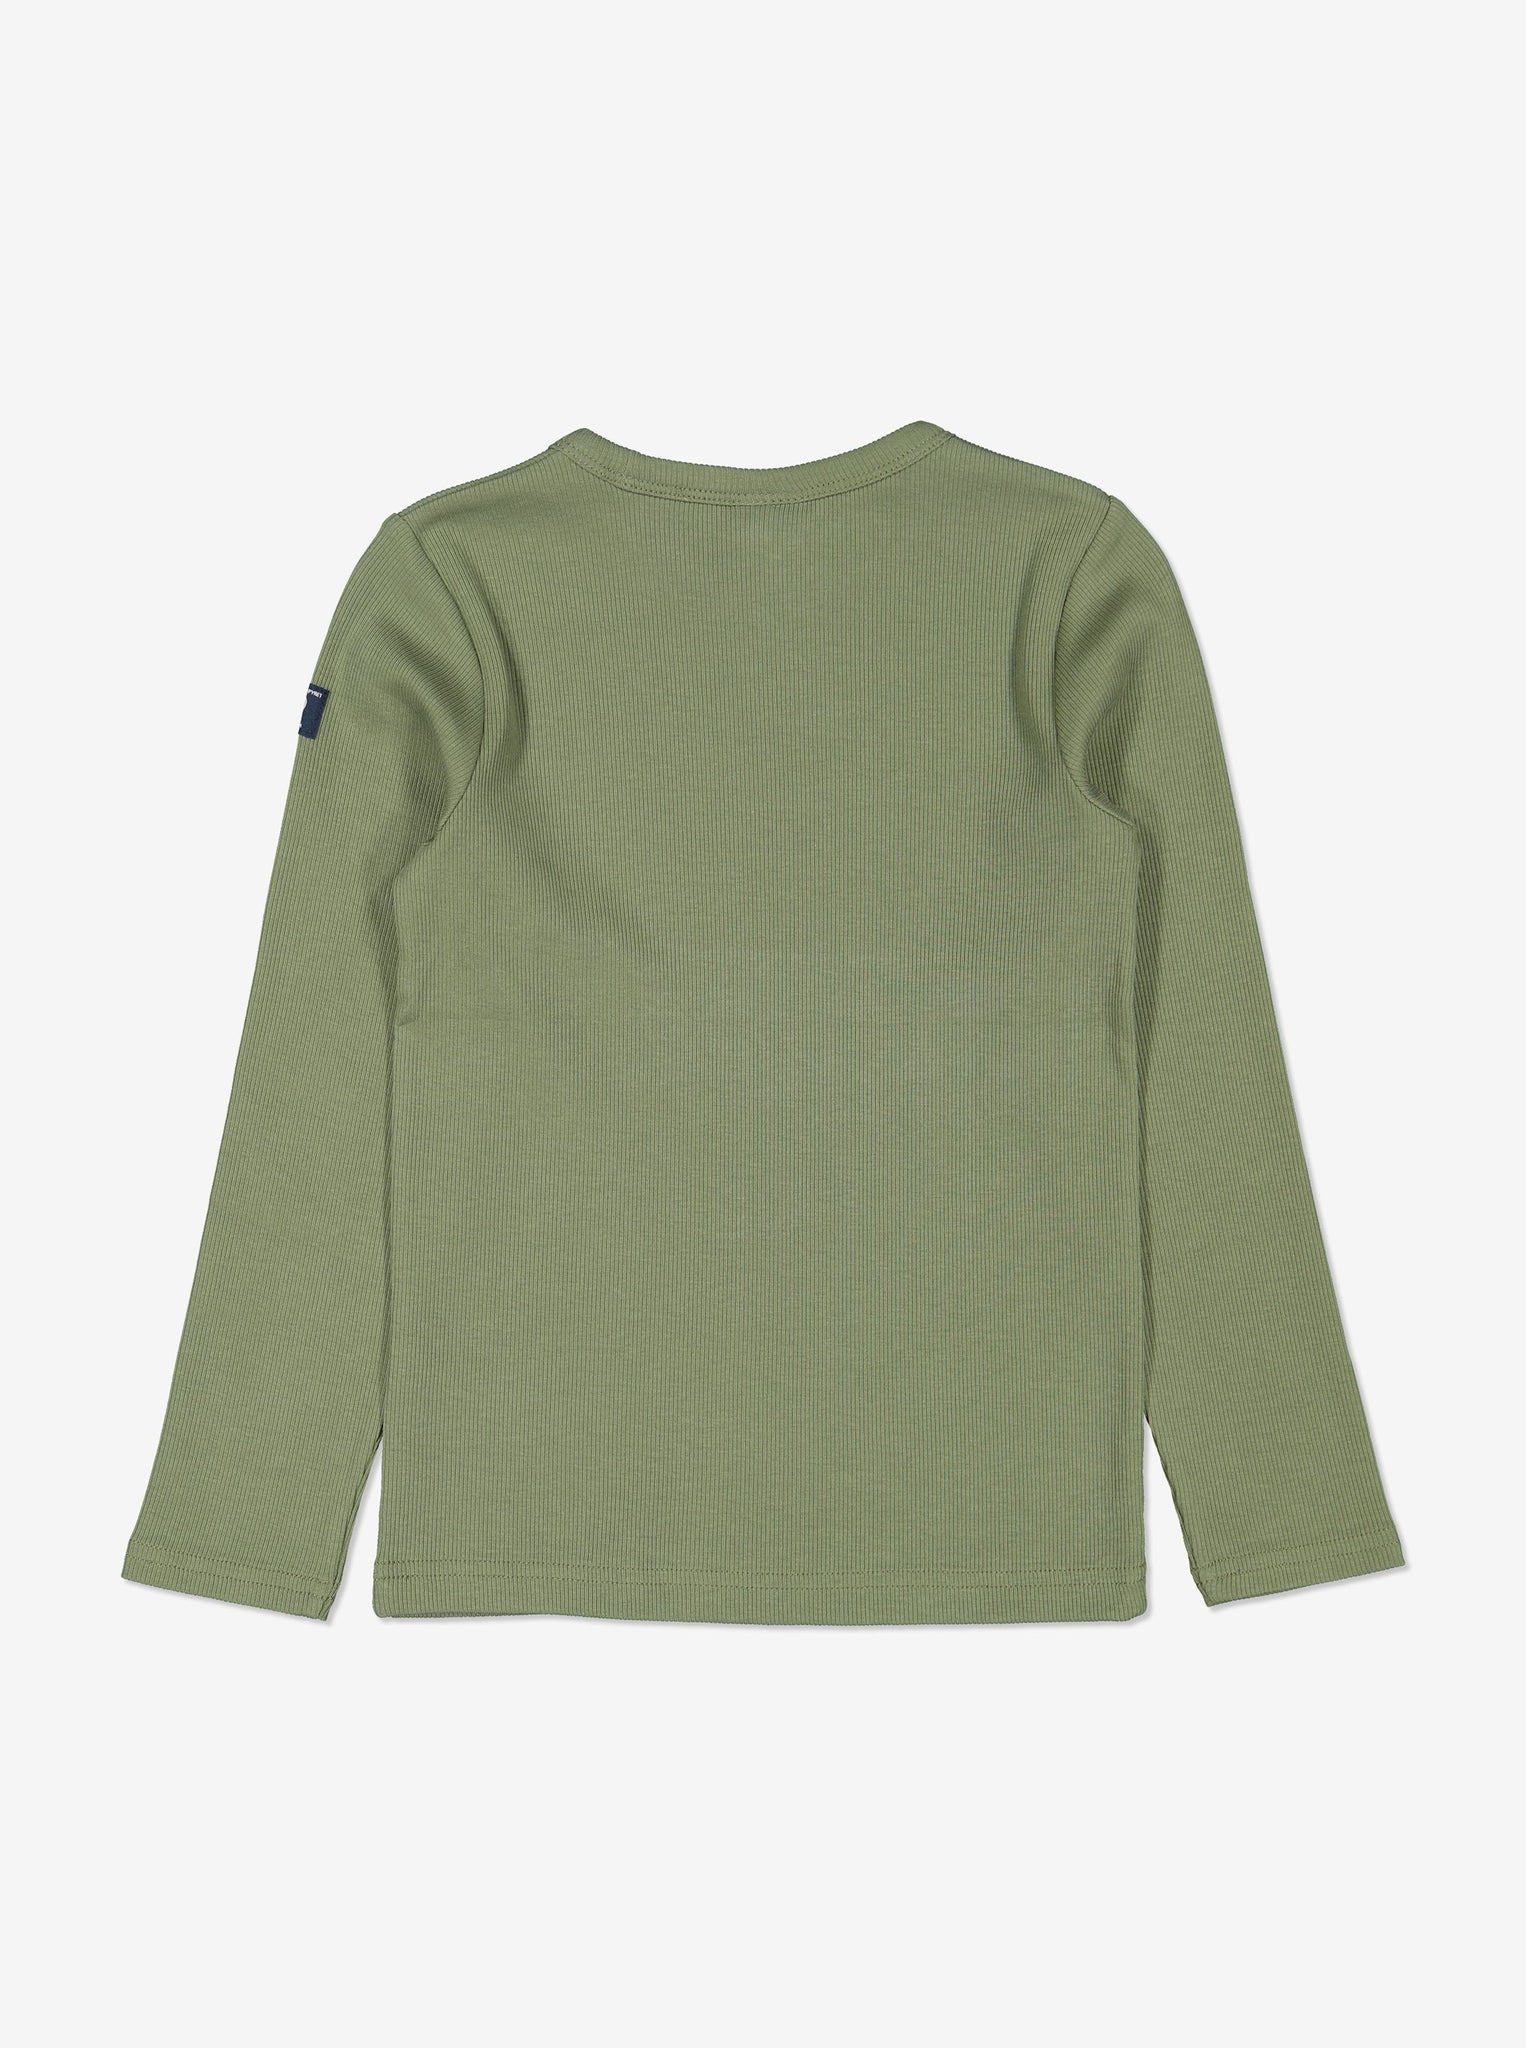 Back view of kids green top in soft organic cotton